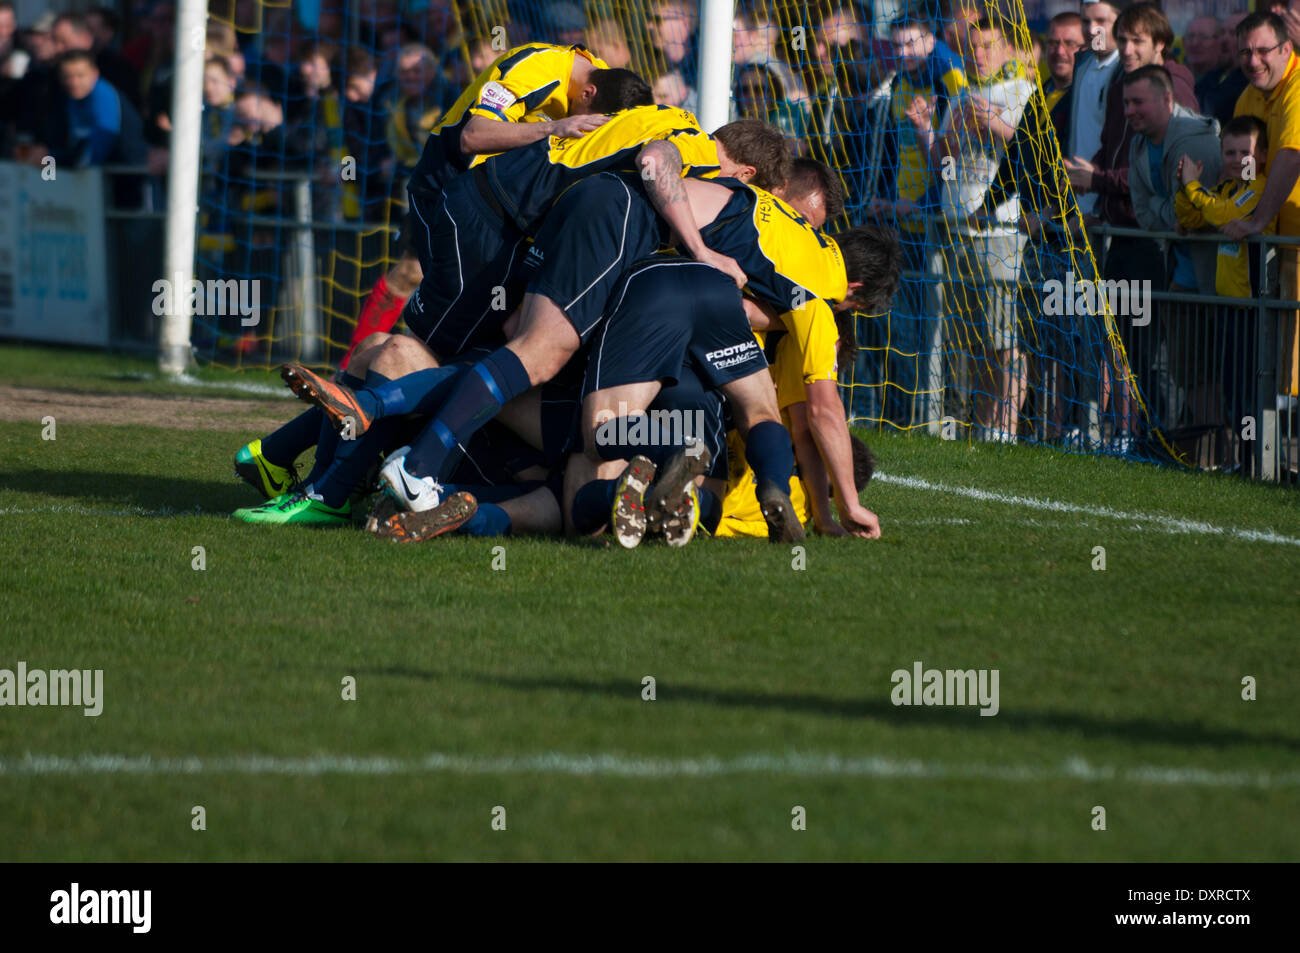 Gosports players celebrate with Prior, scorer of the team's second goal, Gosport Borough FC v Bishops Storford FC, SKRILL Southern Division, 29th March 2014. (c) Paul Gordon | Alamy Live News Stock Photo